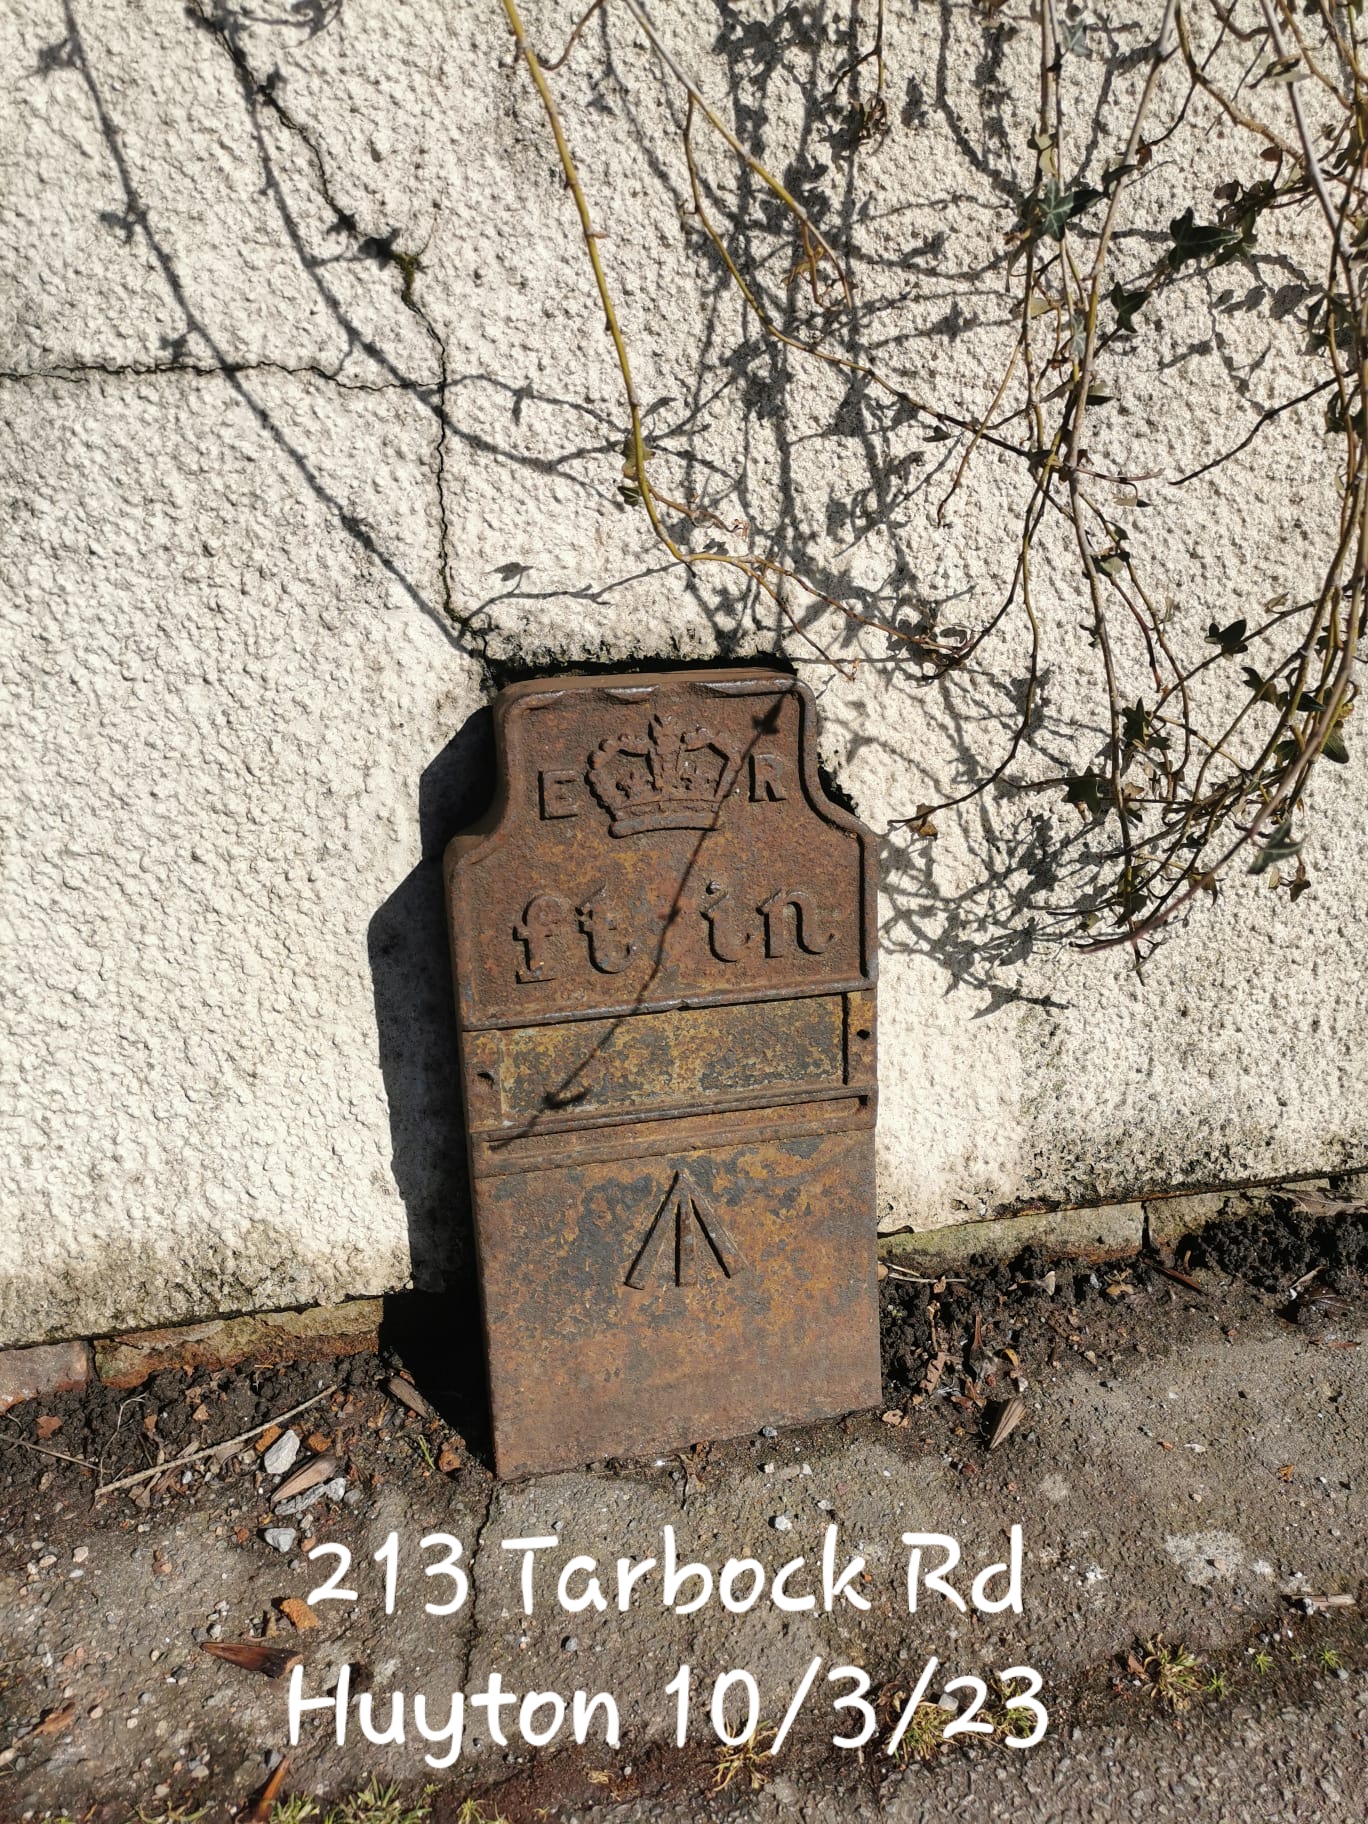 Telegraph cable marker post at 213 Tarbock Road, Huyton, Liverpool by Jan Gibbons 